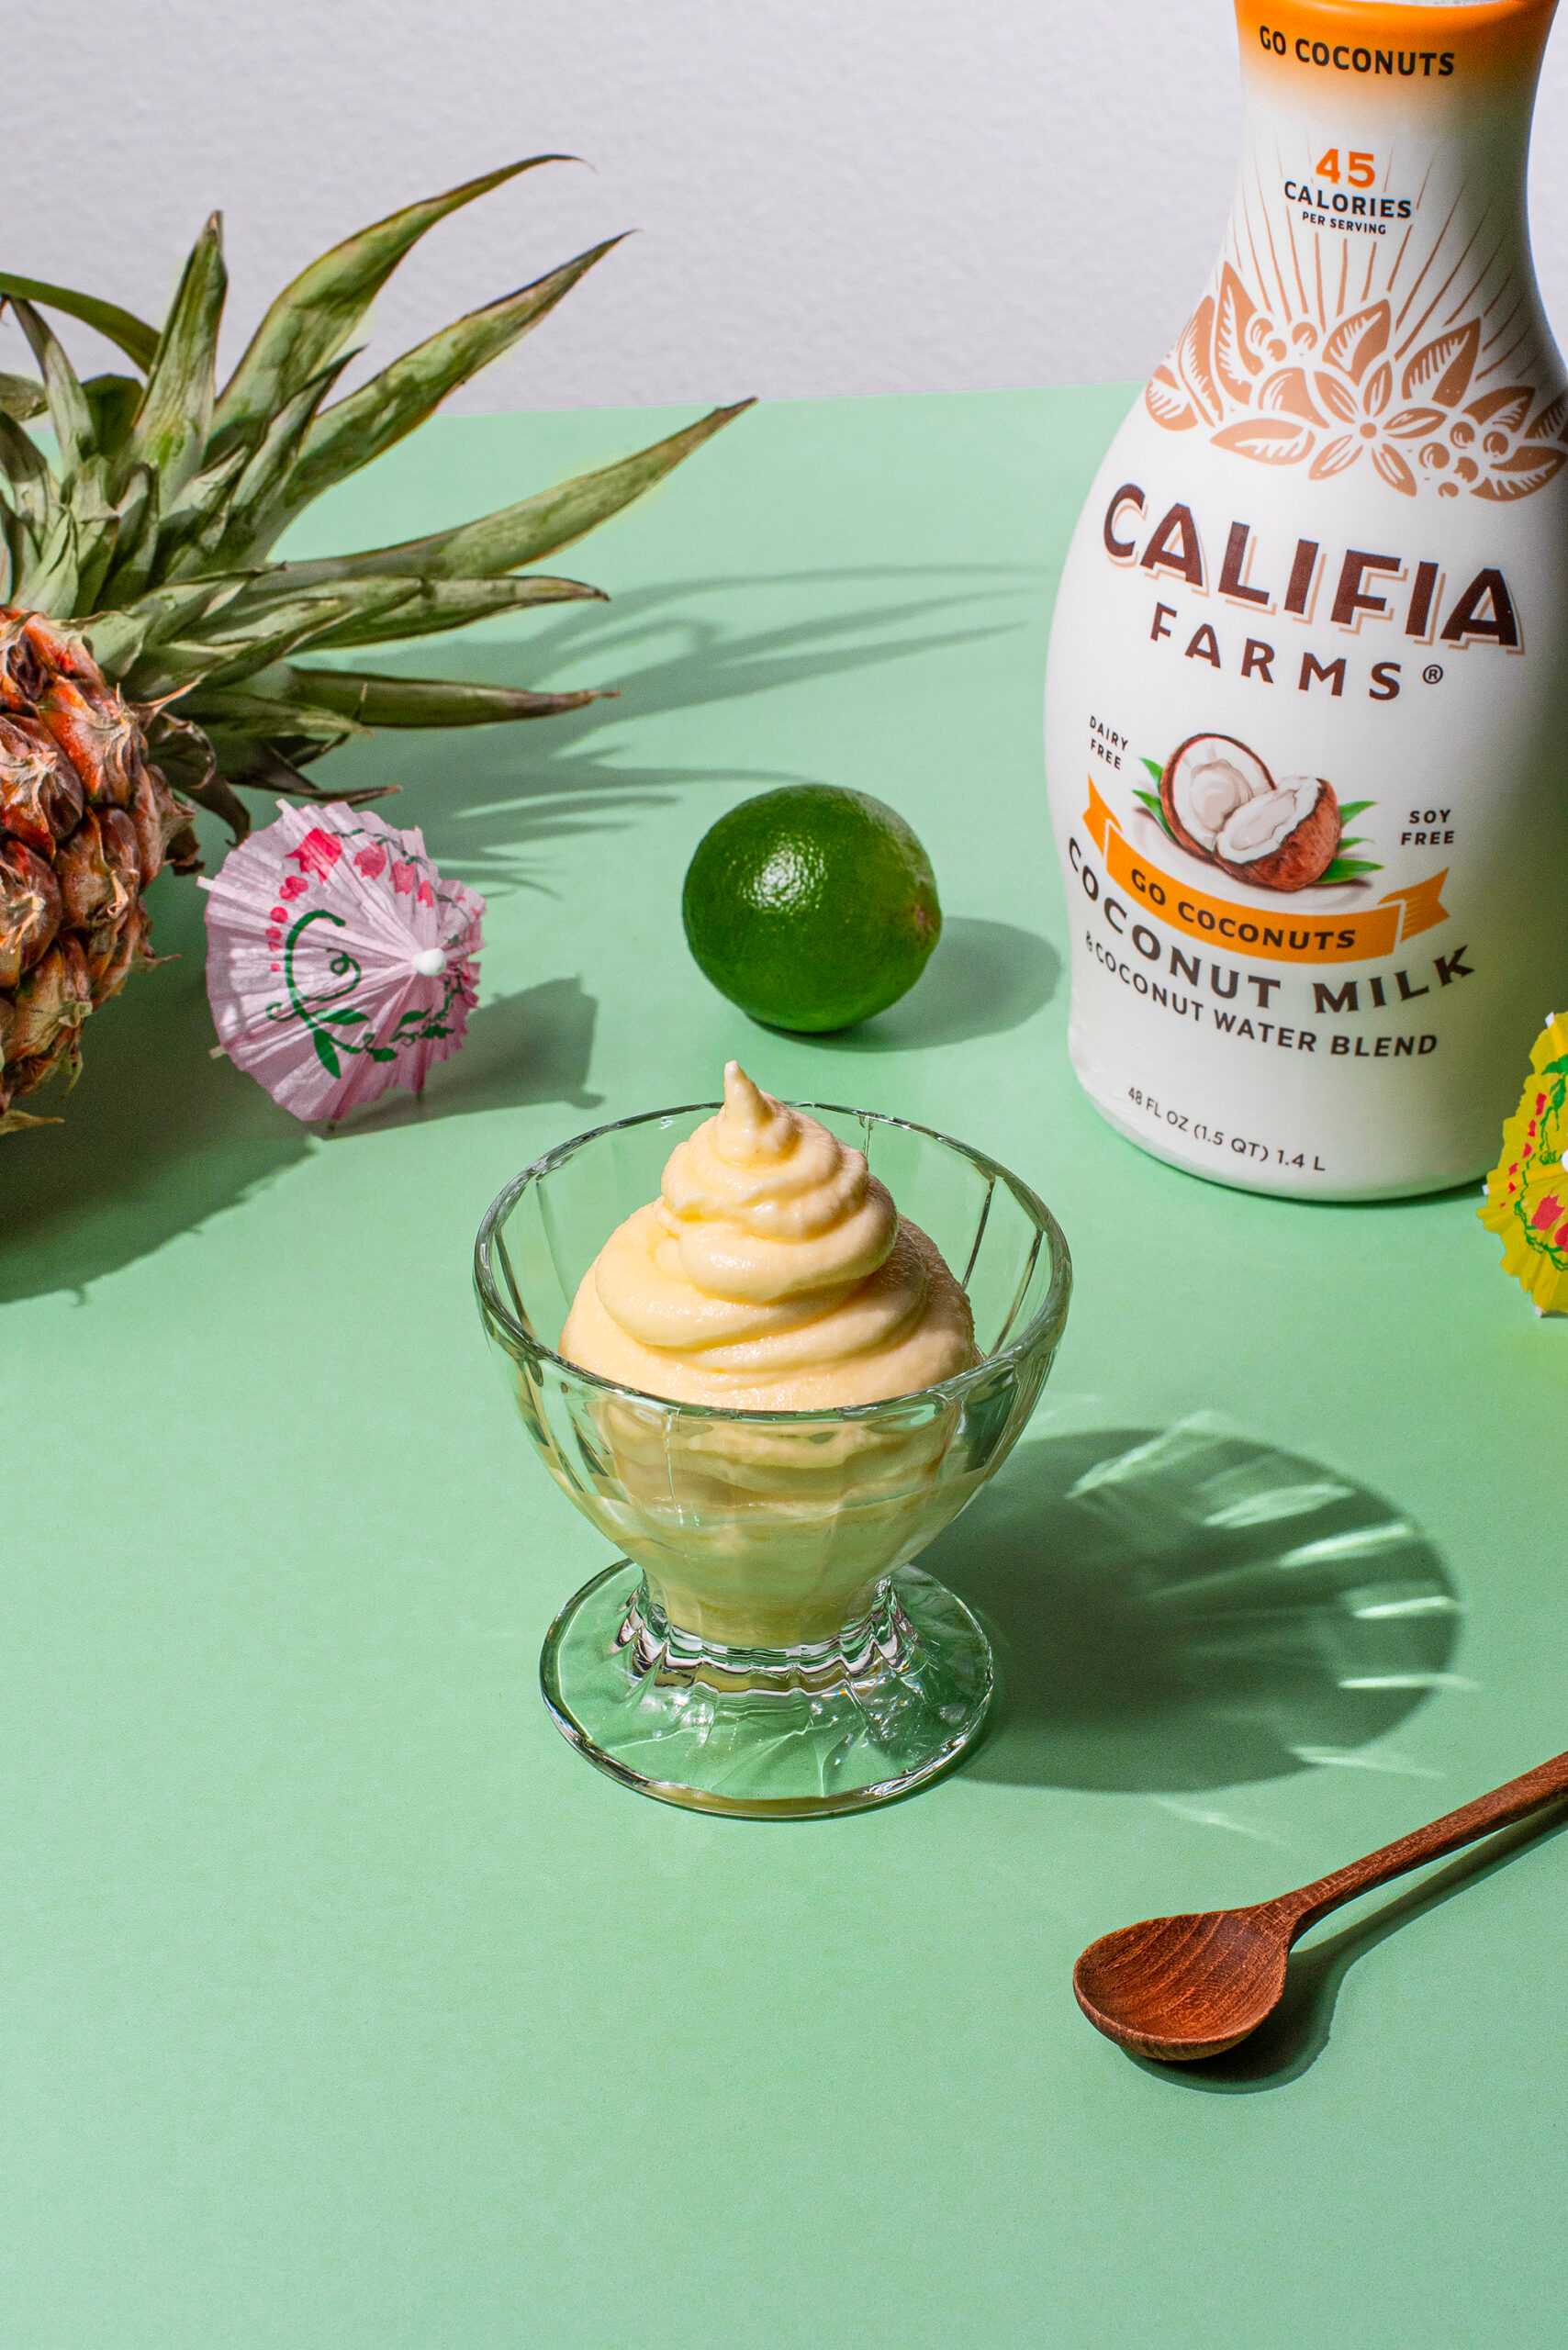 A small portion of Pineapple Coconut Soft Serve sits in the center of the image, surrounded by a pineapple, lime, wooden spoon, and Califia Farms Go Coconuts Coconutmilk.